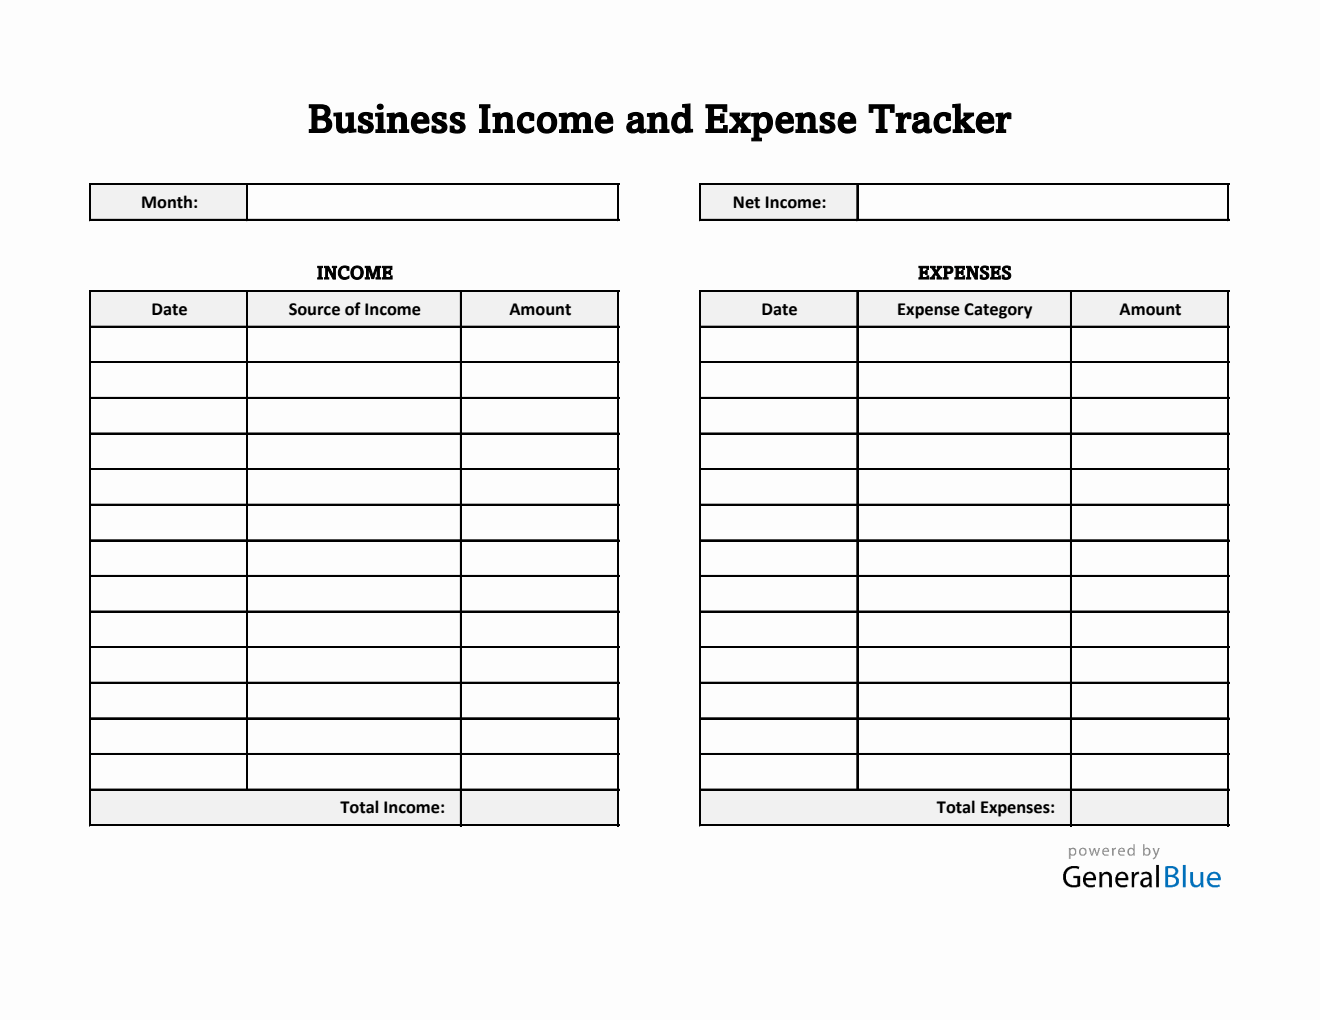 Free Business Income and Expense Tracker in Excel (Simple)